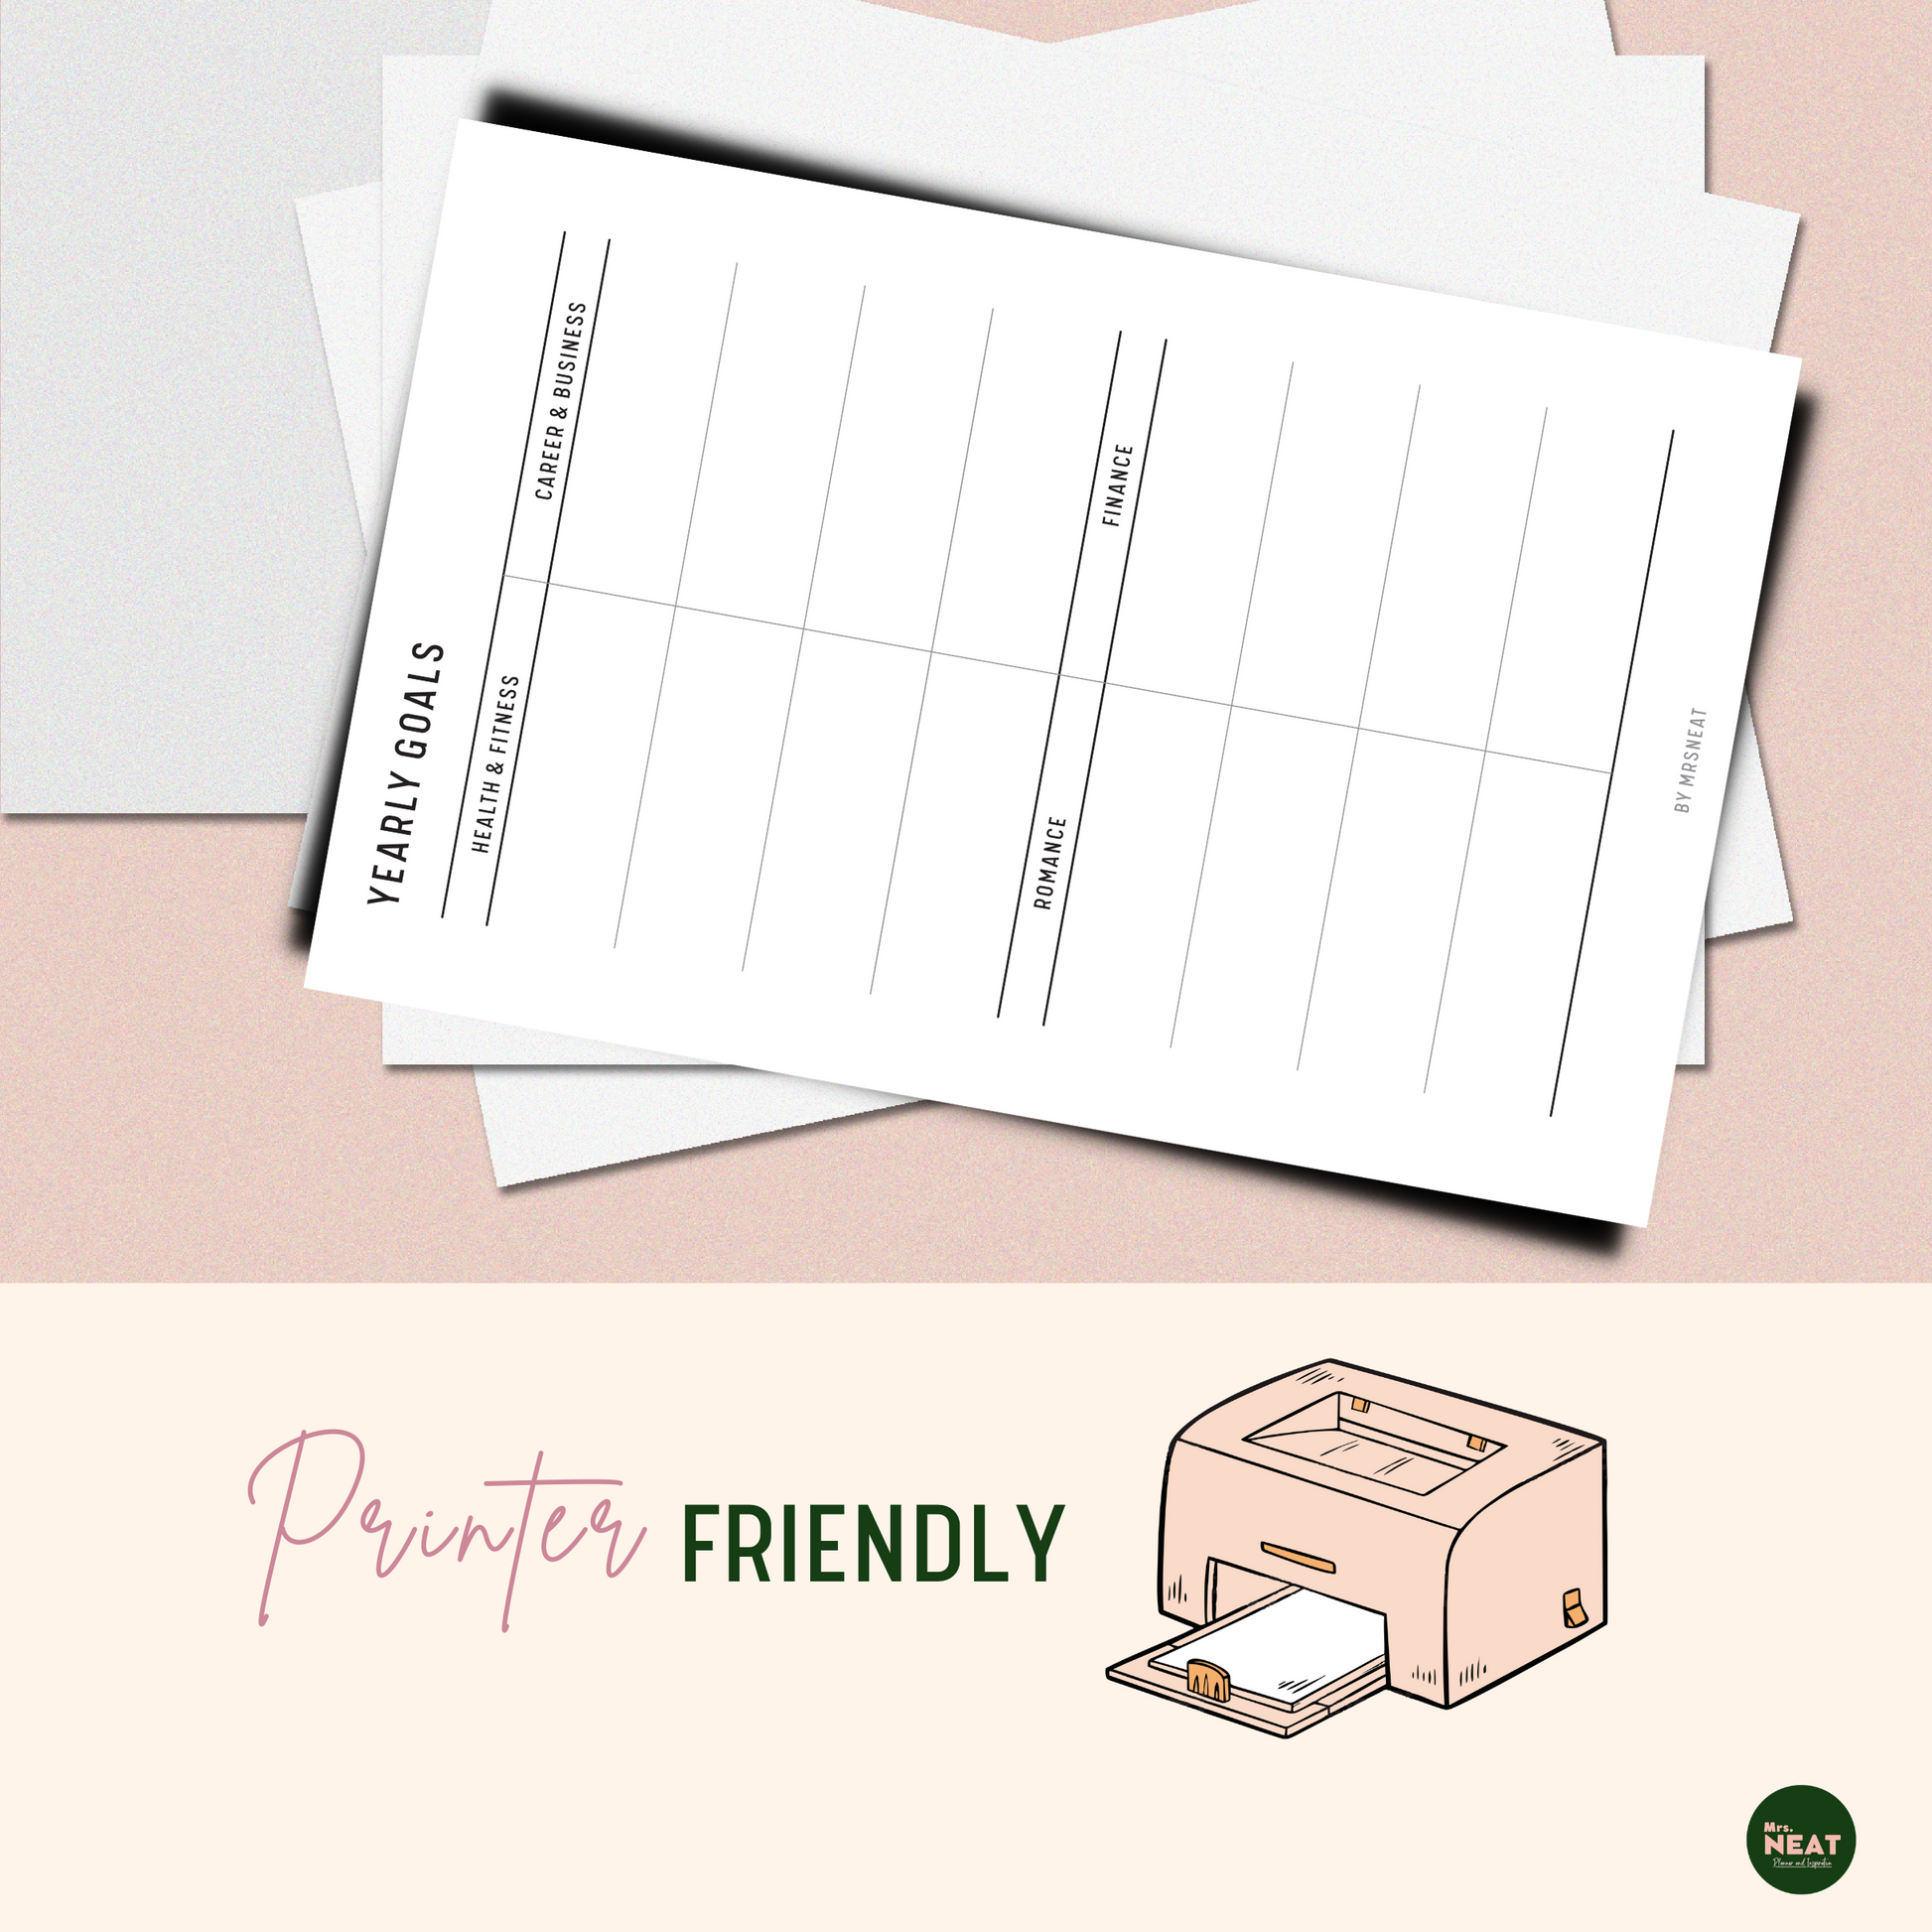 8 Areas of Life Goal Planner for Yearly Goals printed out from cute pink printer